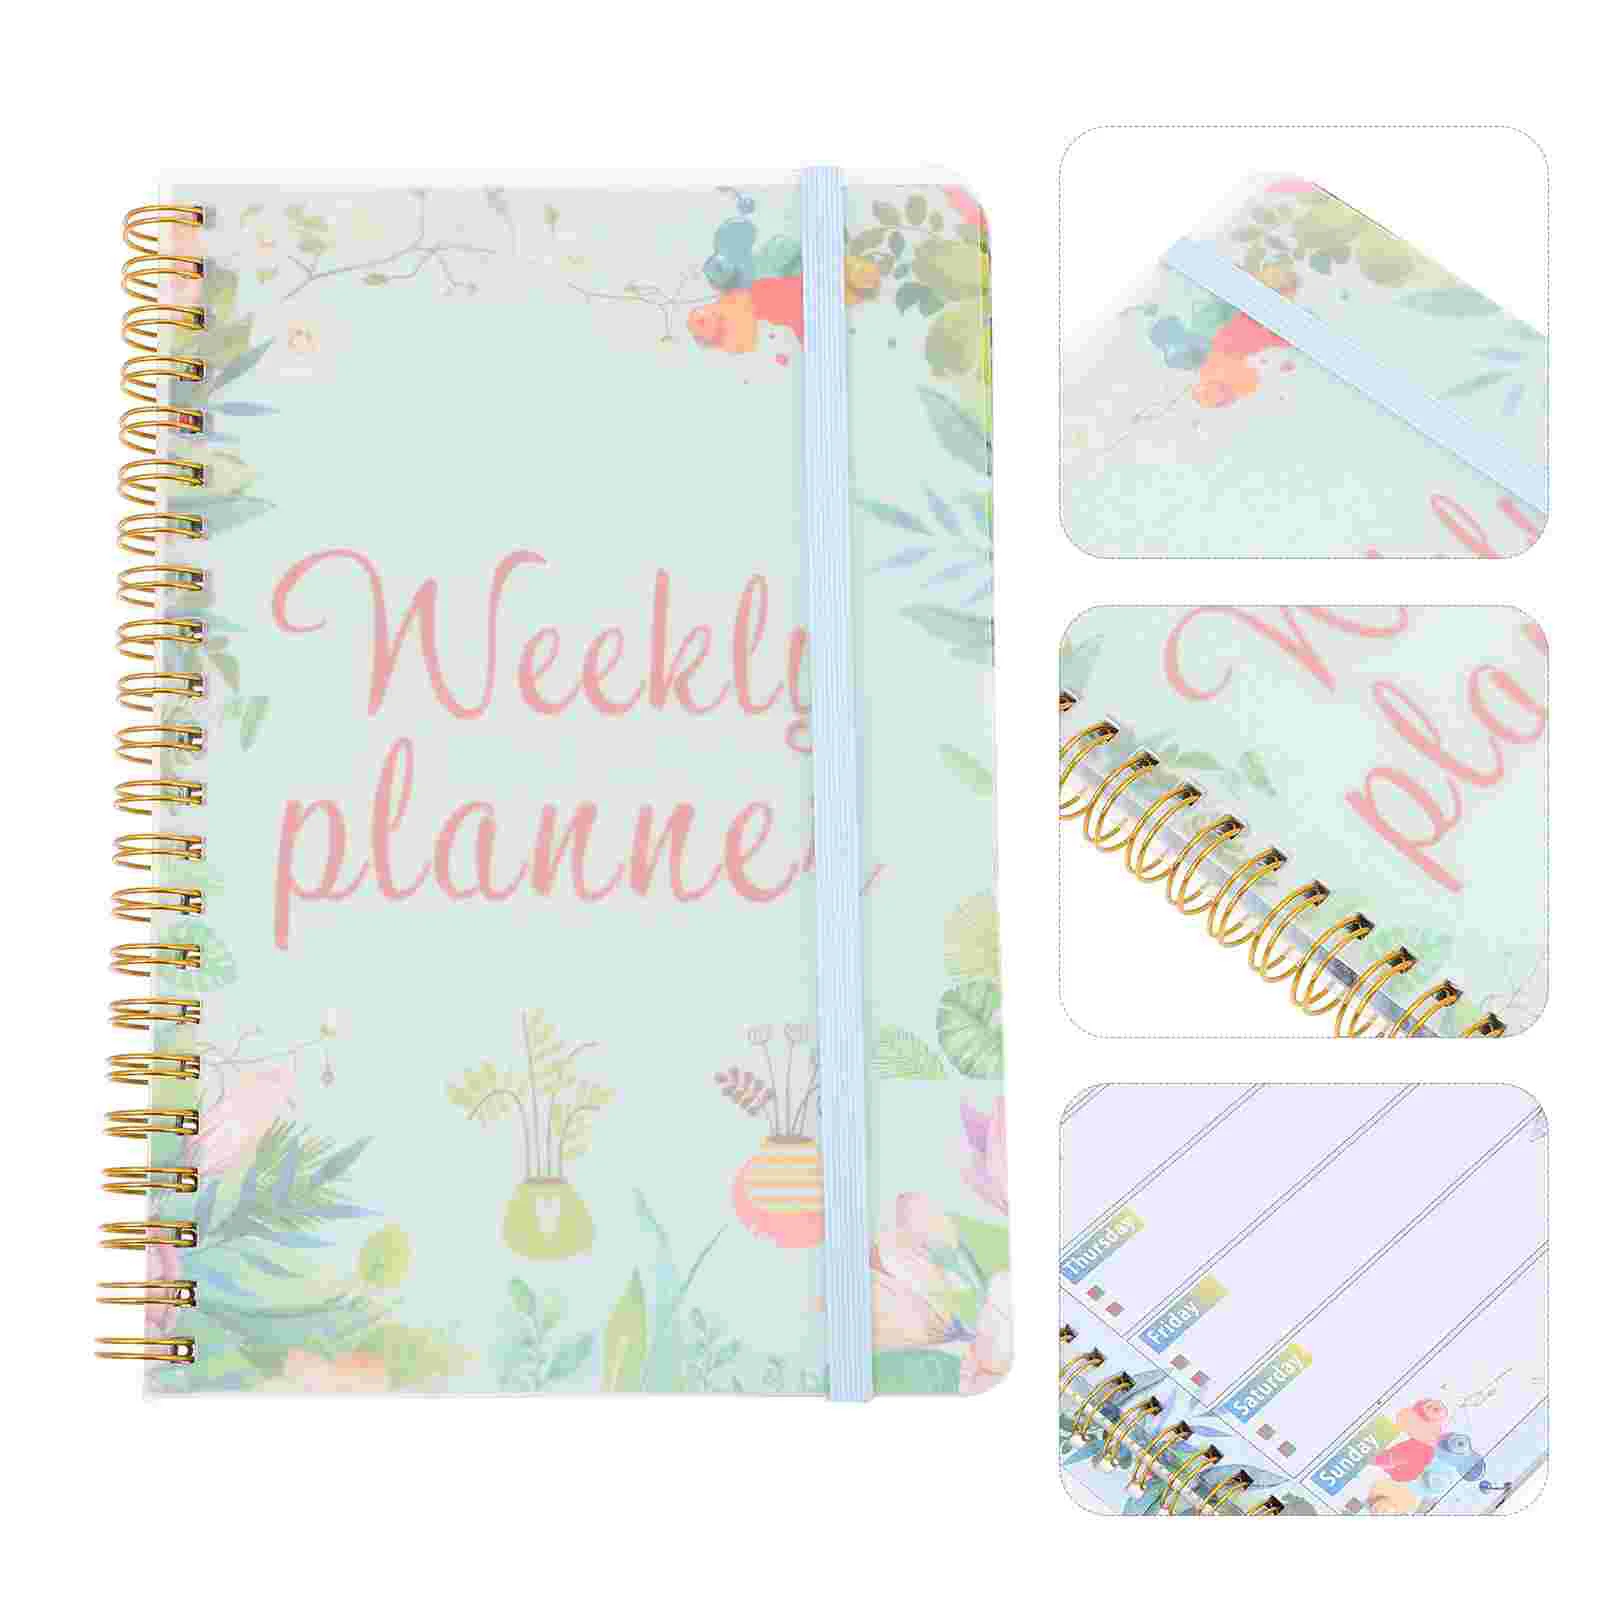 

Planner Notebook Schedule Spiral Book Weekly Daily Notepad Journal Calendar Appointment Monthly Dolist Pocket Agenda Diary Dated